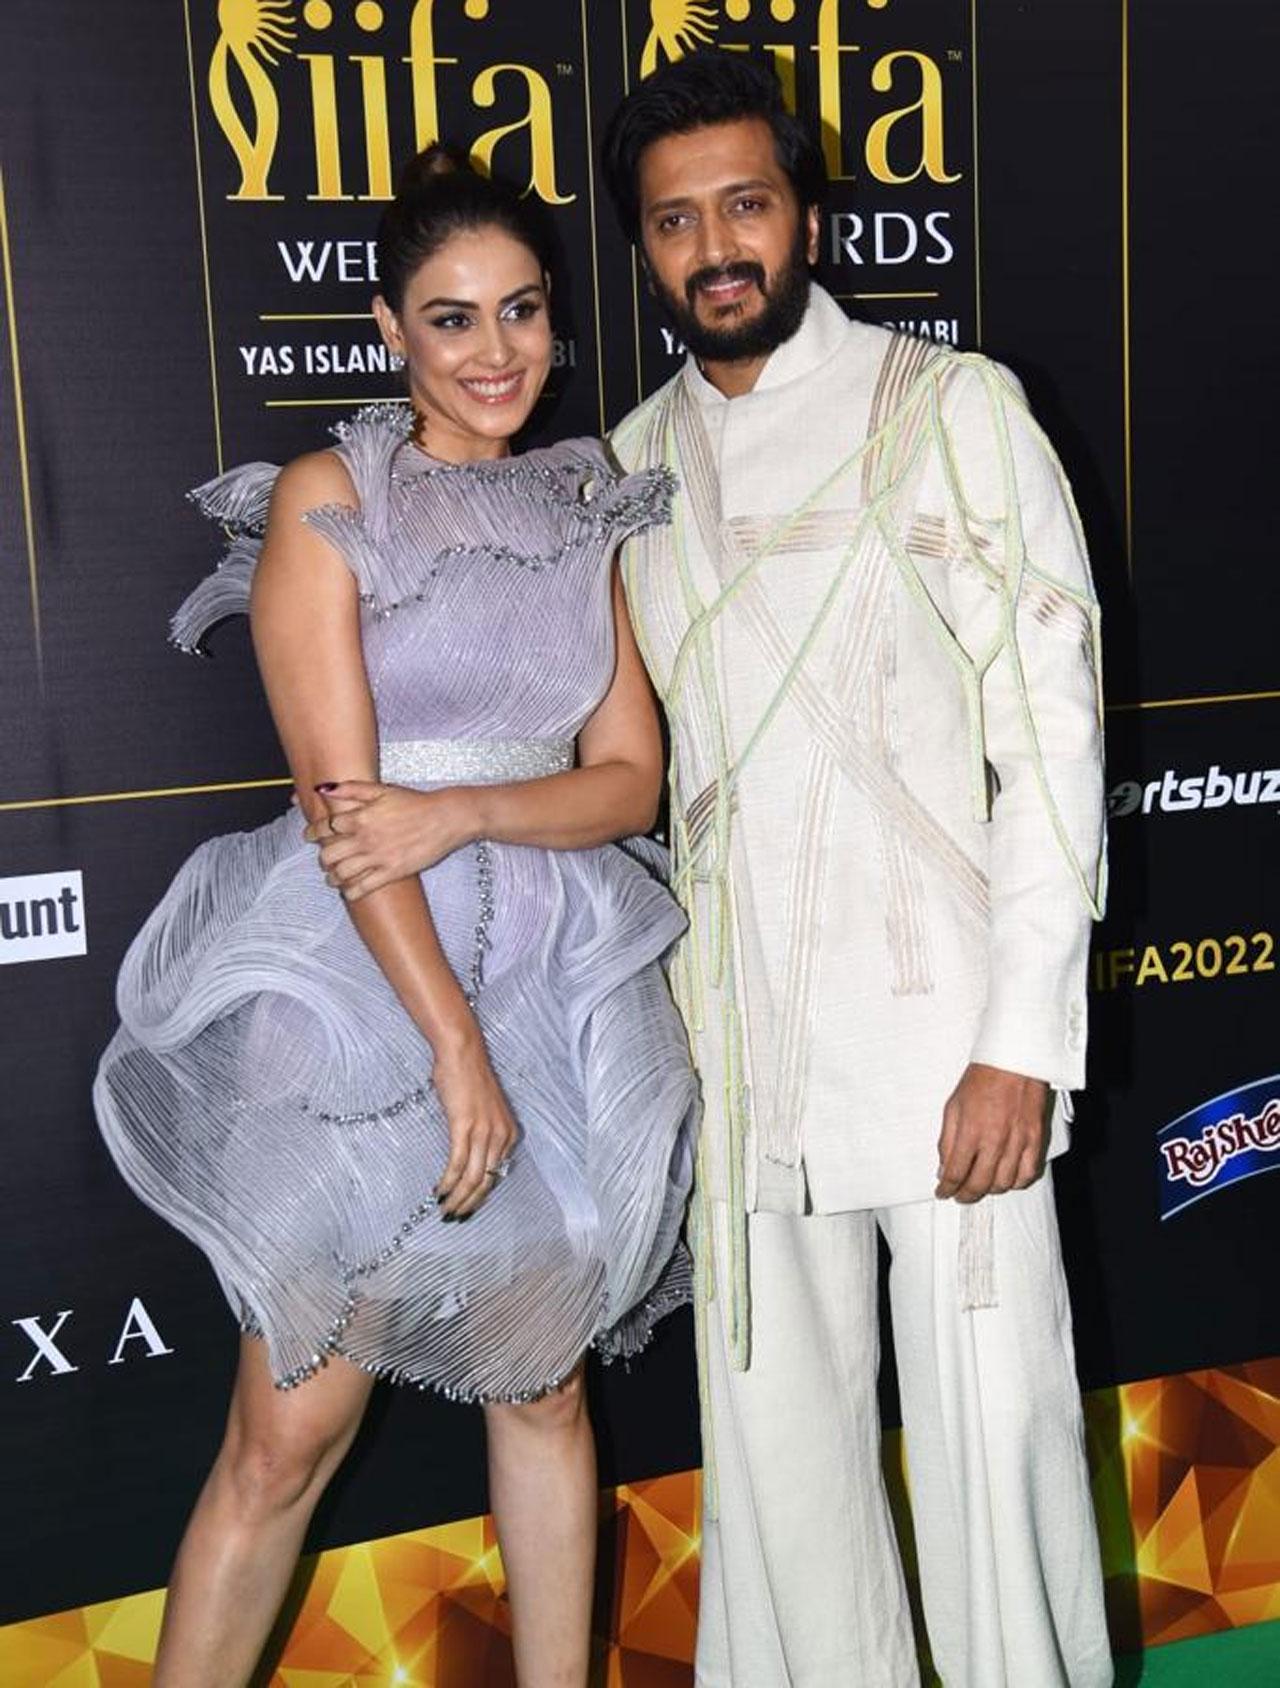 Riteish Deshmukh and Genelia D’Souza make for a lovely couple and this picture is proof. They made their debut together in 2003 with Tujjhe Meri Kasam and were then seen in films like Masti and Tere Naal Love Ho Gaya